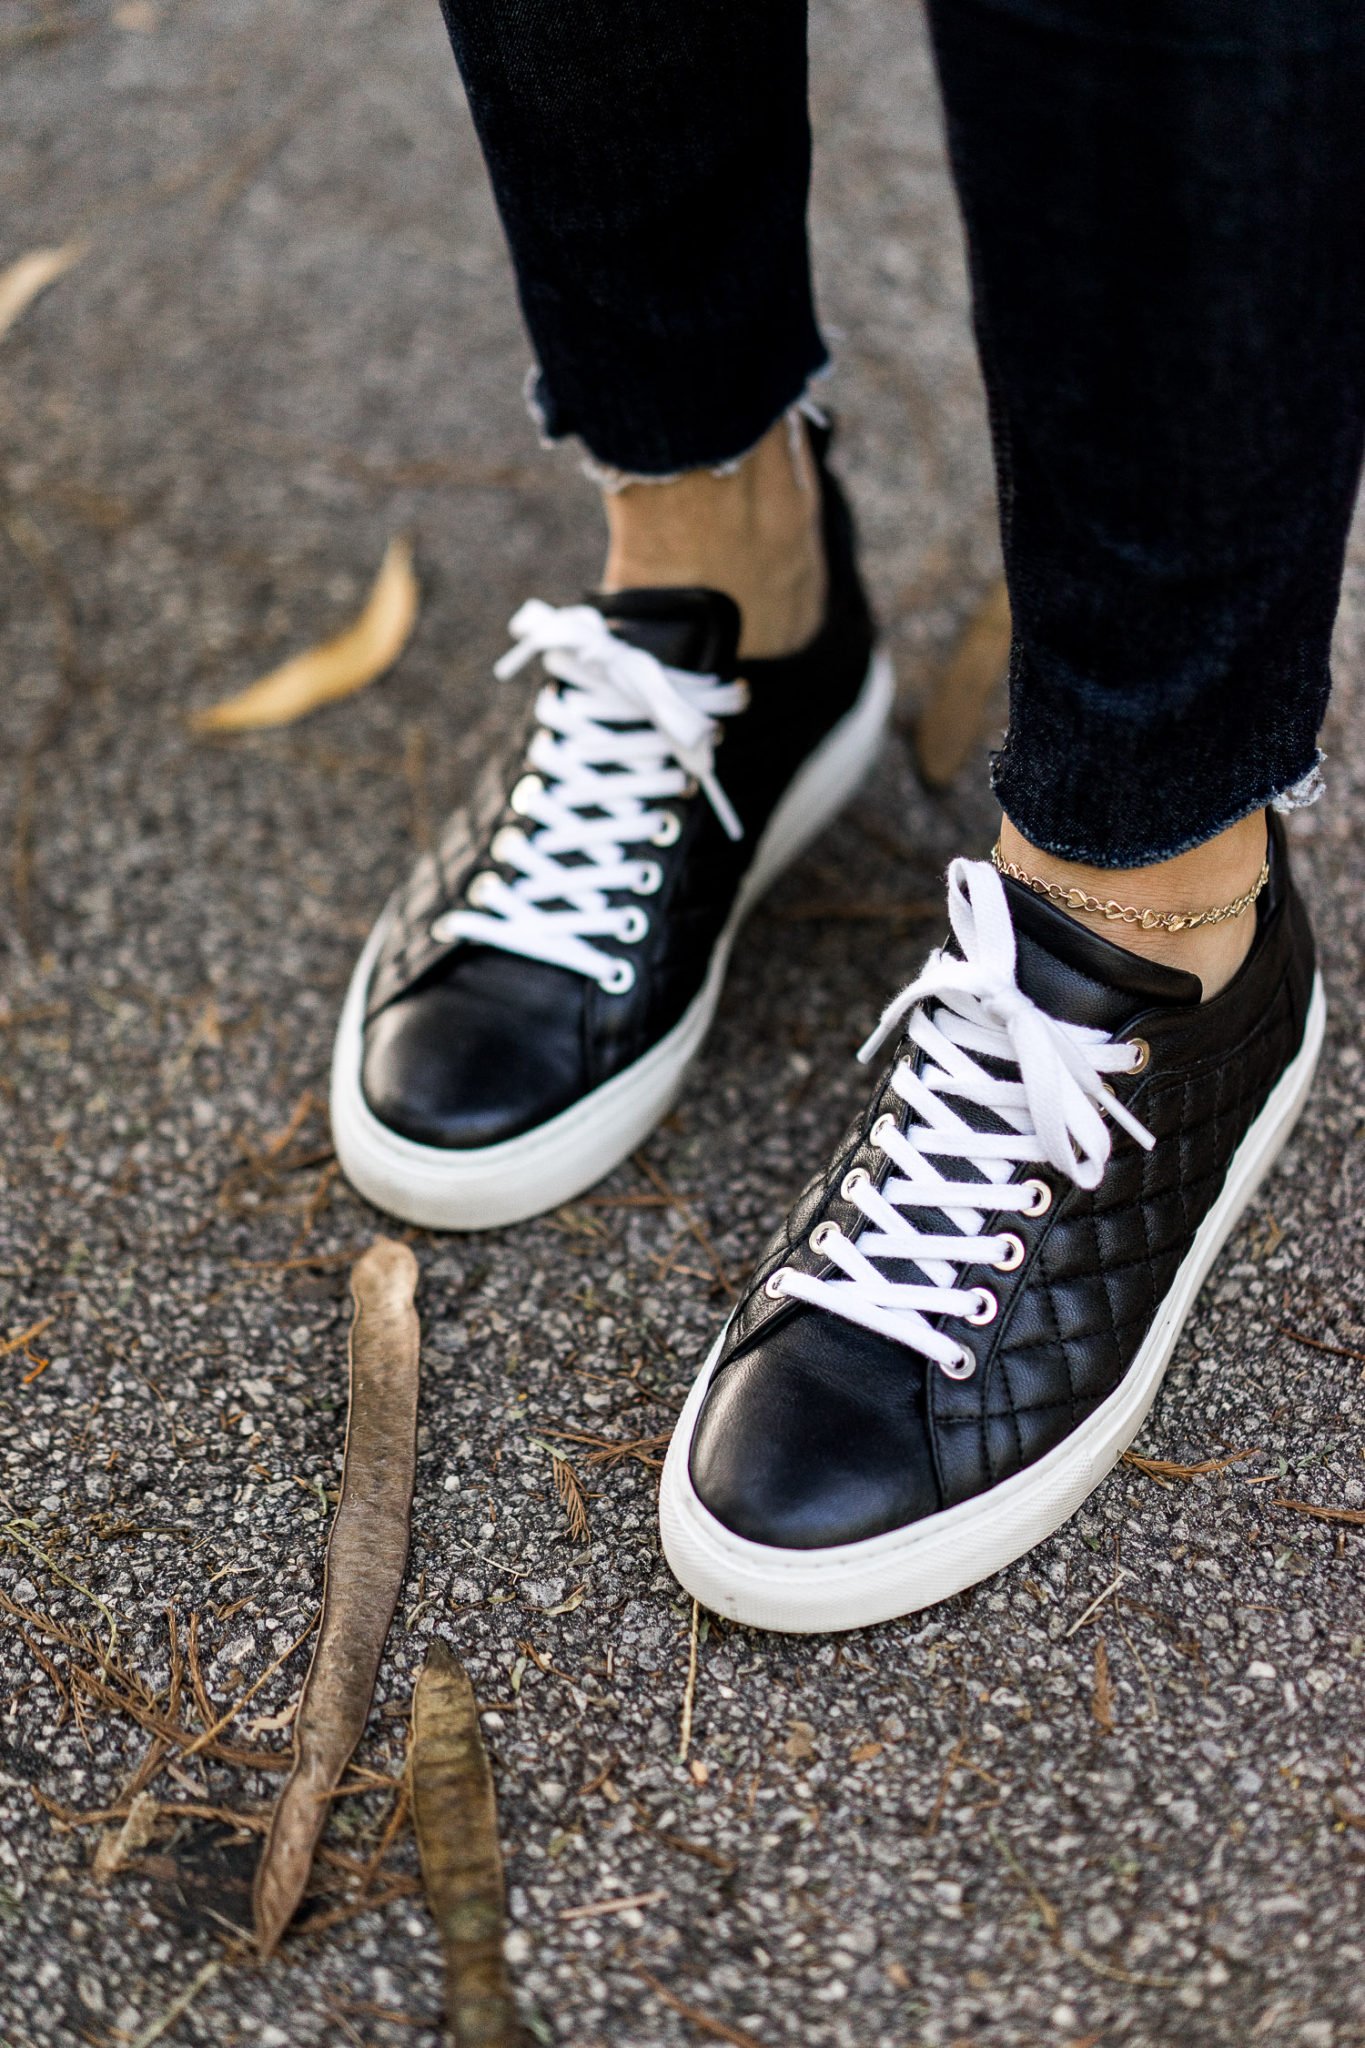 Amanda wears the M.Gemi Quilted Palestra sneaker which are included in their sale.